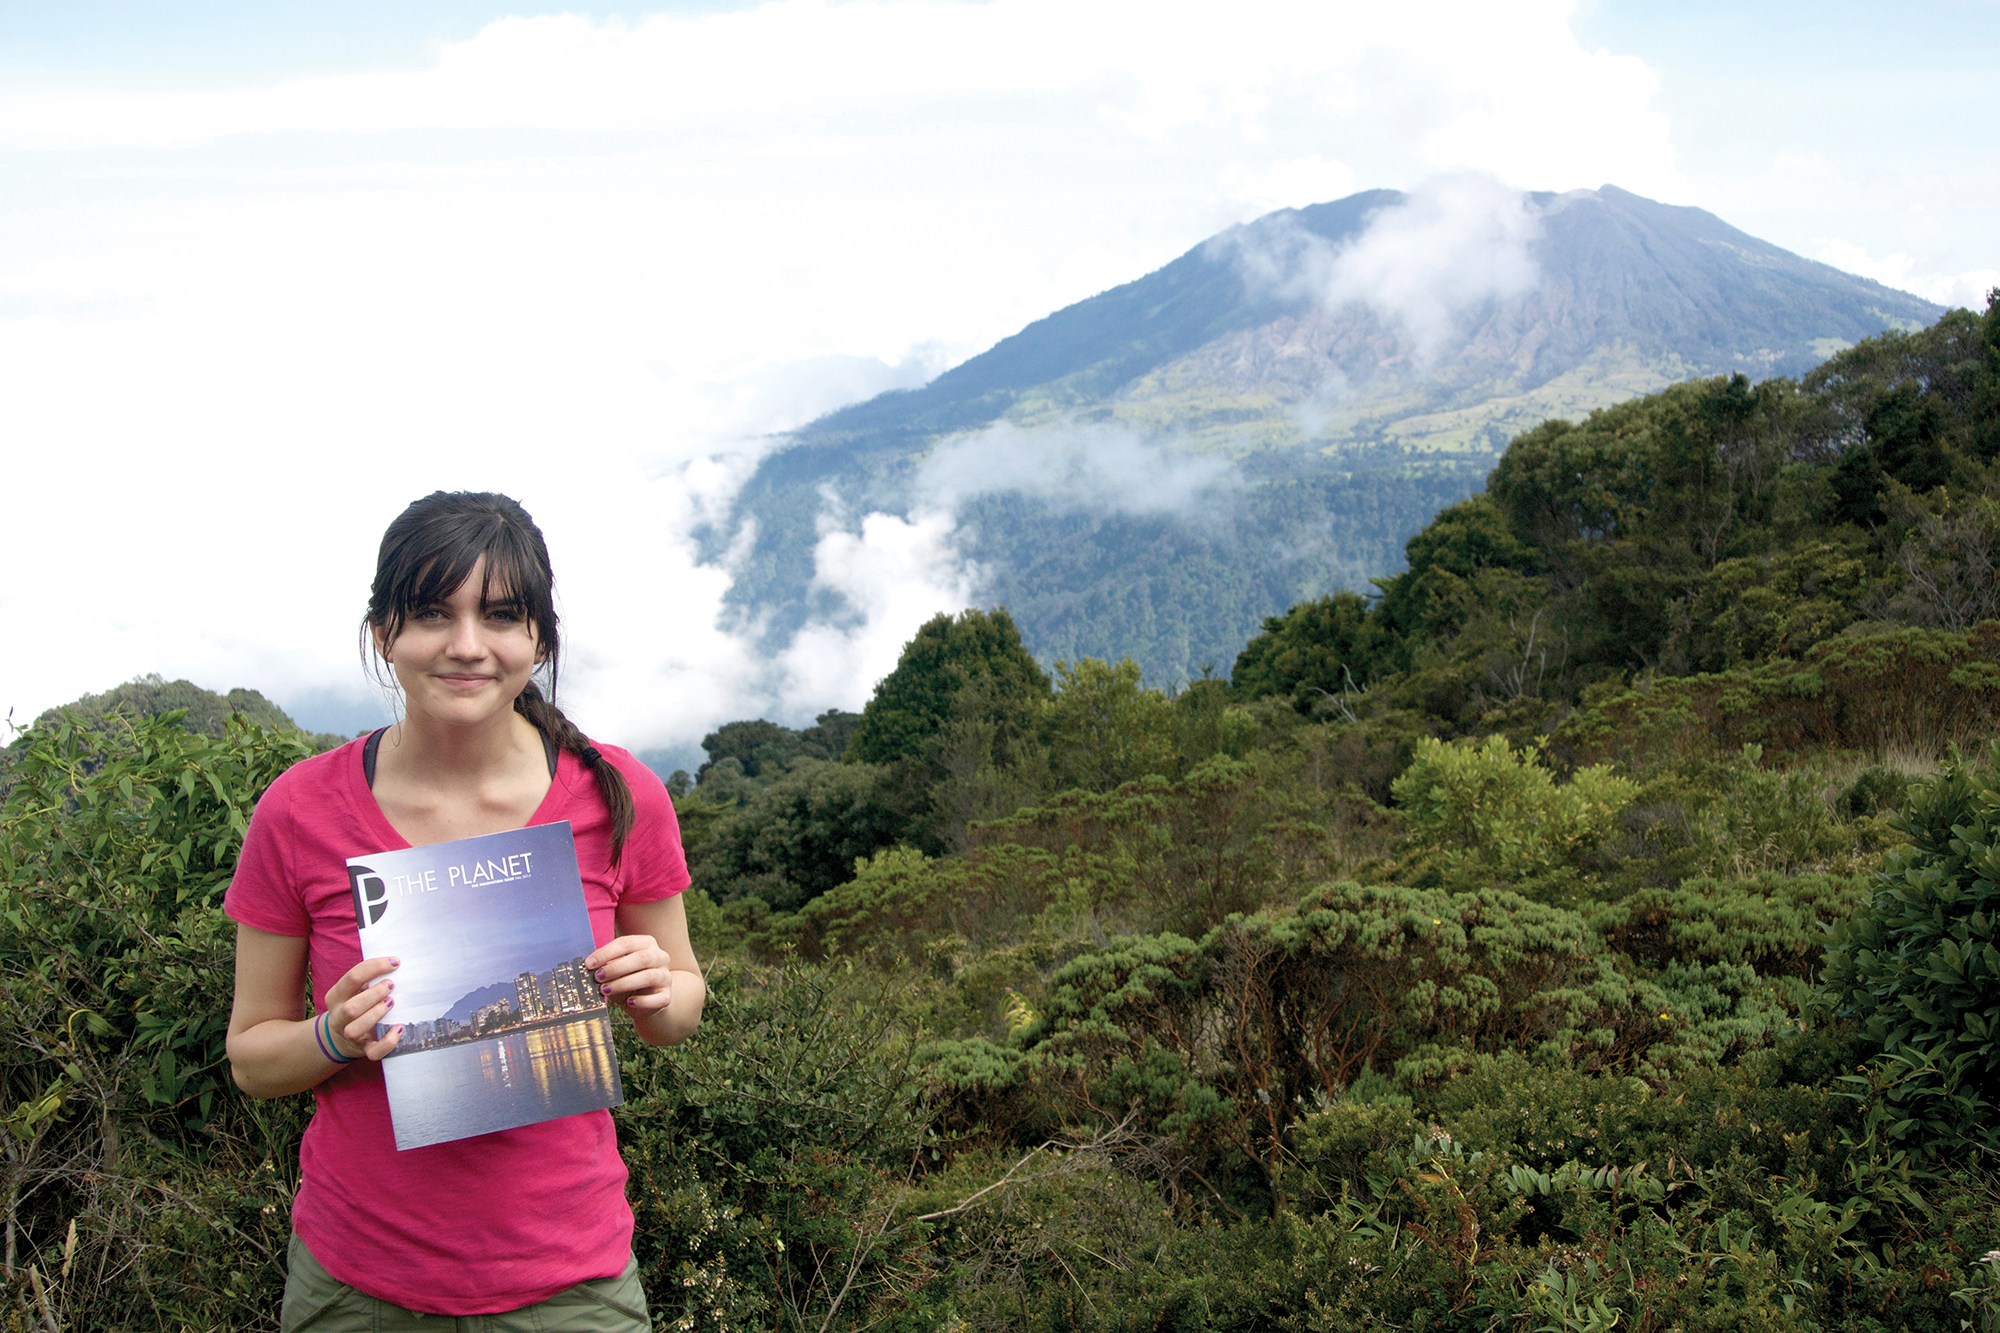 Yvonne is standing in a thick, green jungle holding a copy of The Planet magazine. A large hill or mountain is in the background, partially obscured by a low cloud.